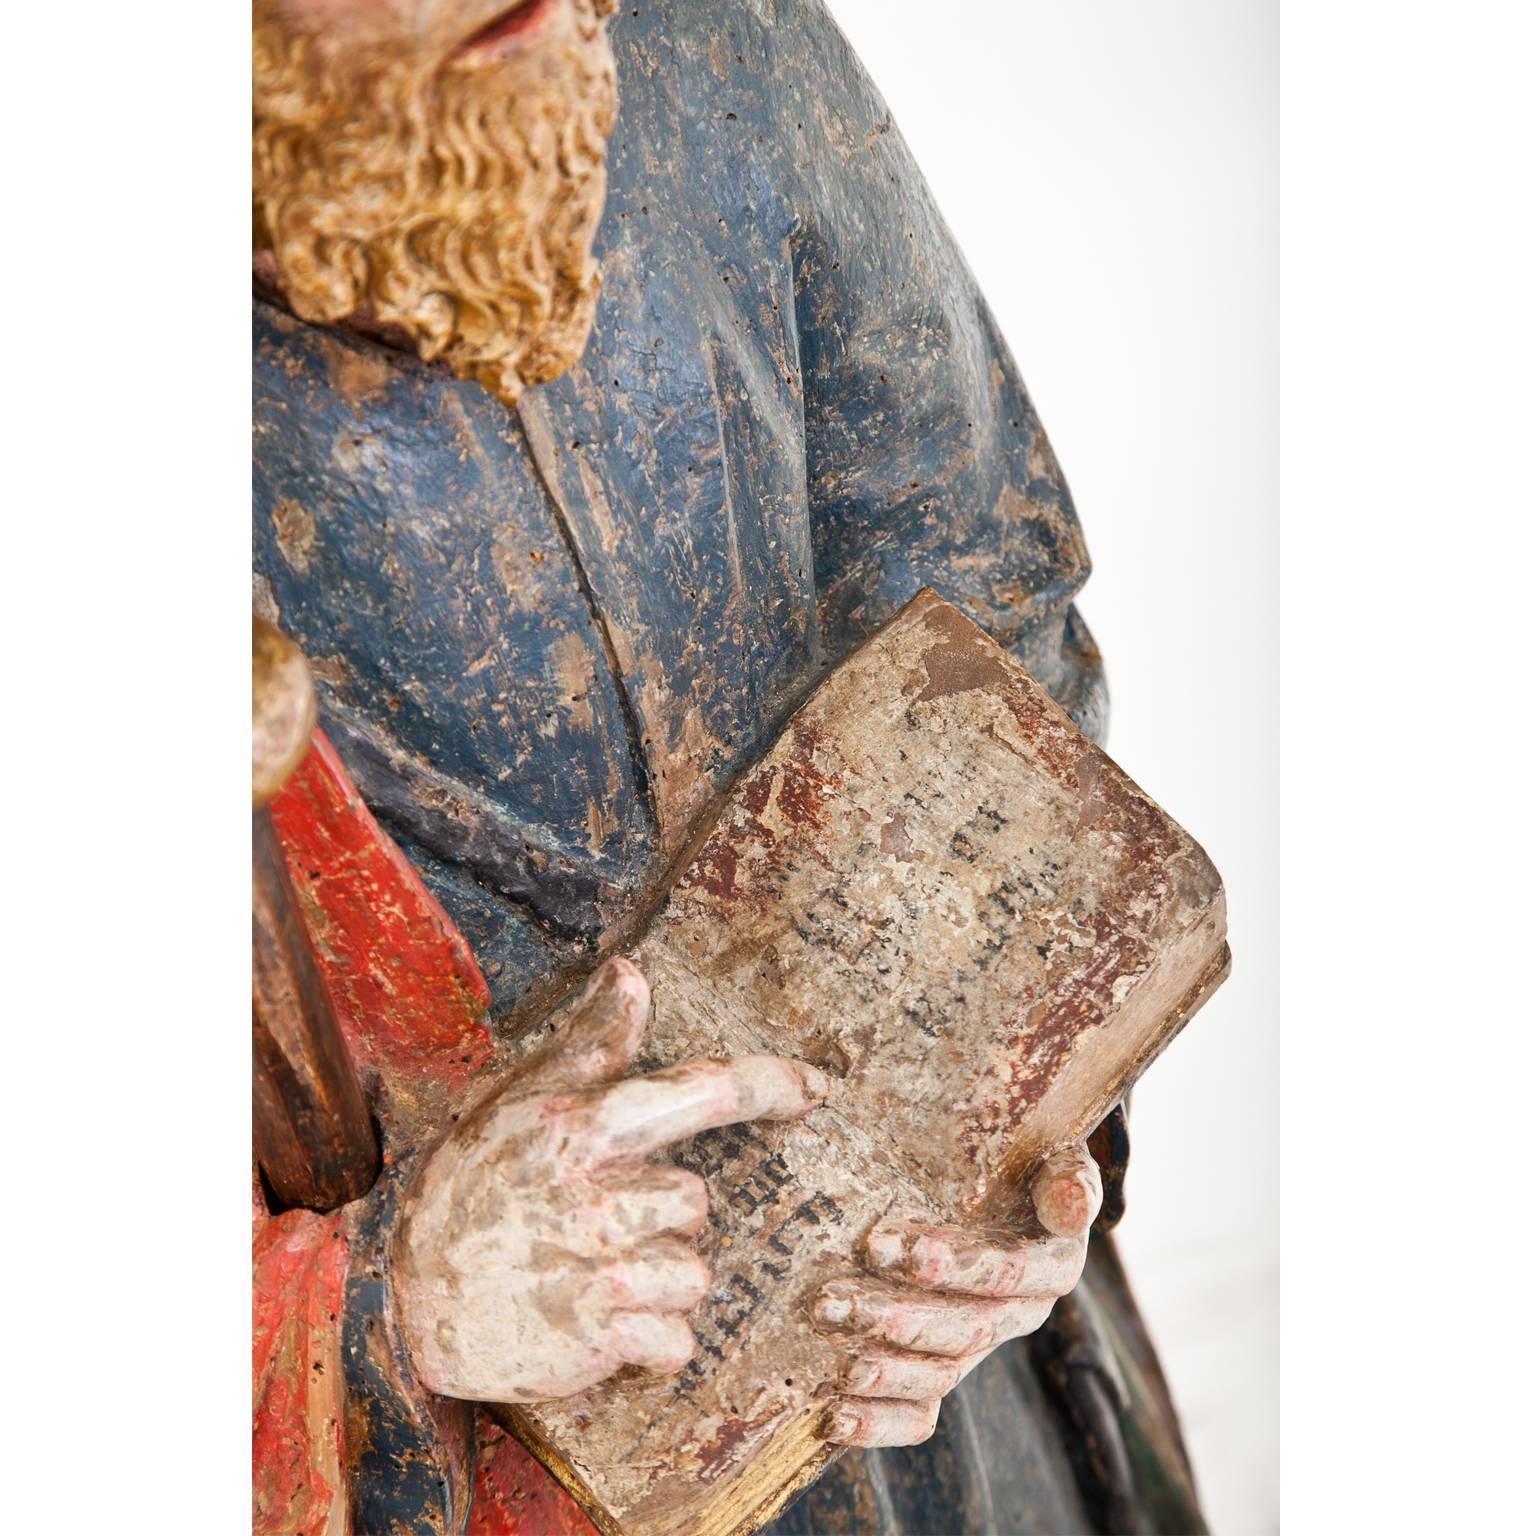 Large sculpture of Saint James with his walking staff and his attribute of the scallop on his hat. He holds in his hands a book and with his right index fingers points to a text passage. He is depicted as barefoot, wearing a blue garment and a red